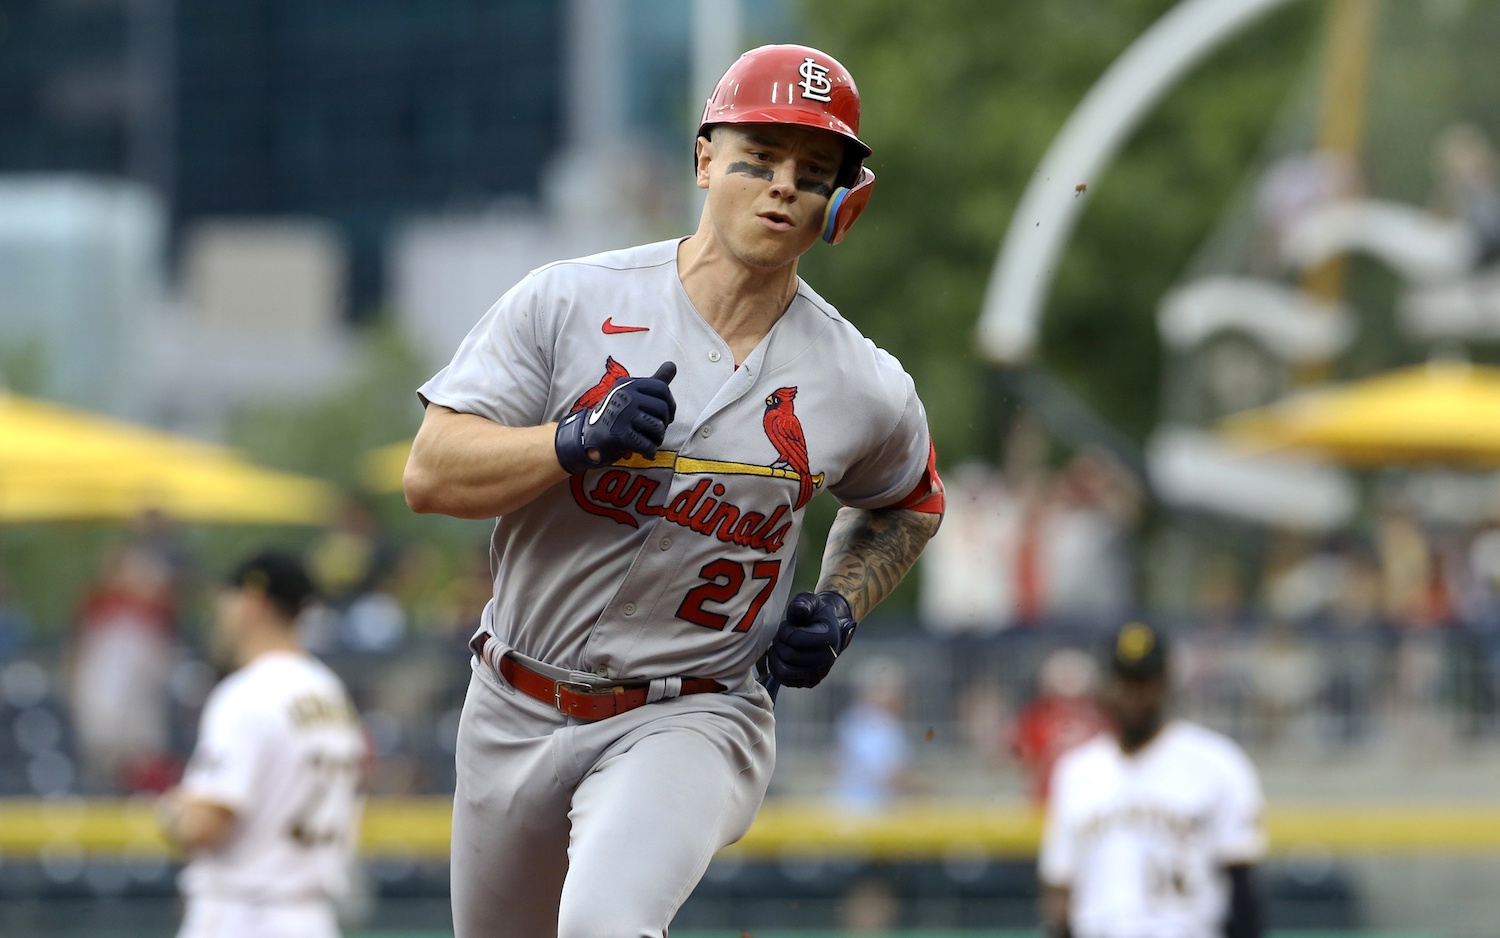 Sep 11, 2022; Pittsburgh, Pennsylvania, USA; St. Louis Cardinals center fielder Tyler O'Neill (27) circles the bases on a game winning solo home run against the Pittsburgh Pirates during the ninth inning at PNC Park. The Cardinals won 4-3. Mandatory Credit: Charles LeClaire-USA TODAY Sports